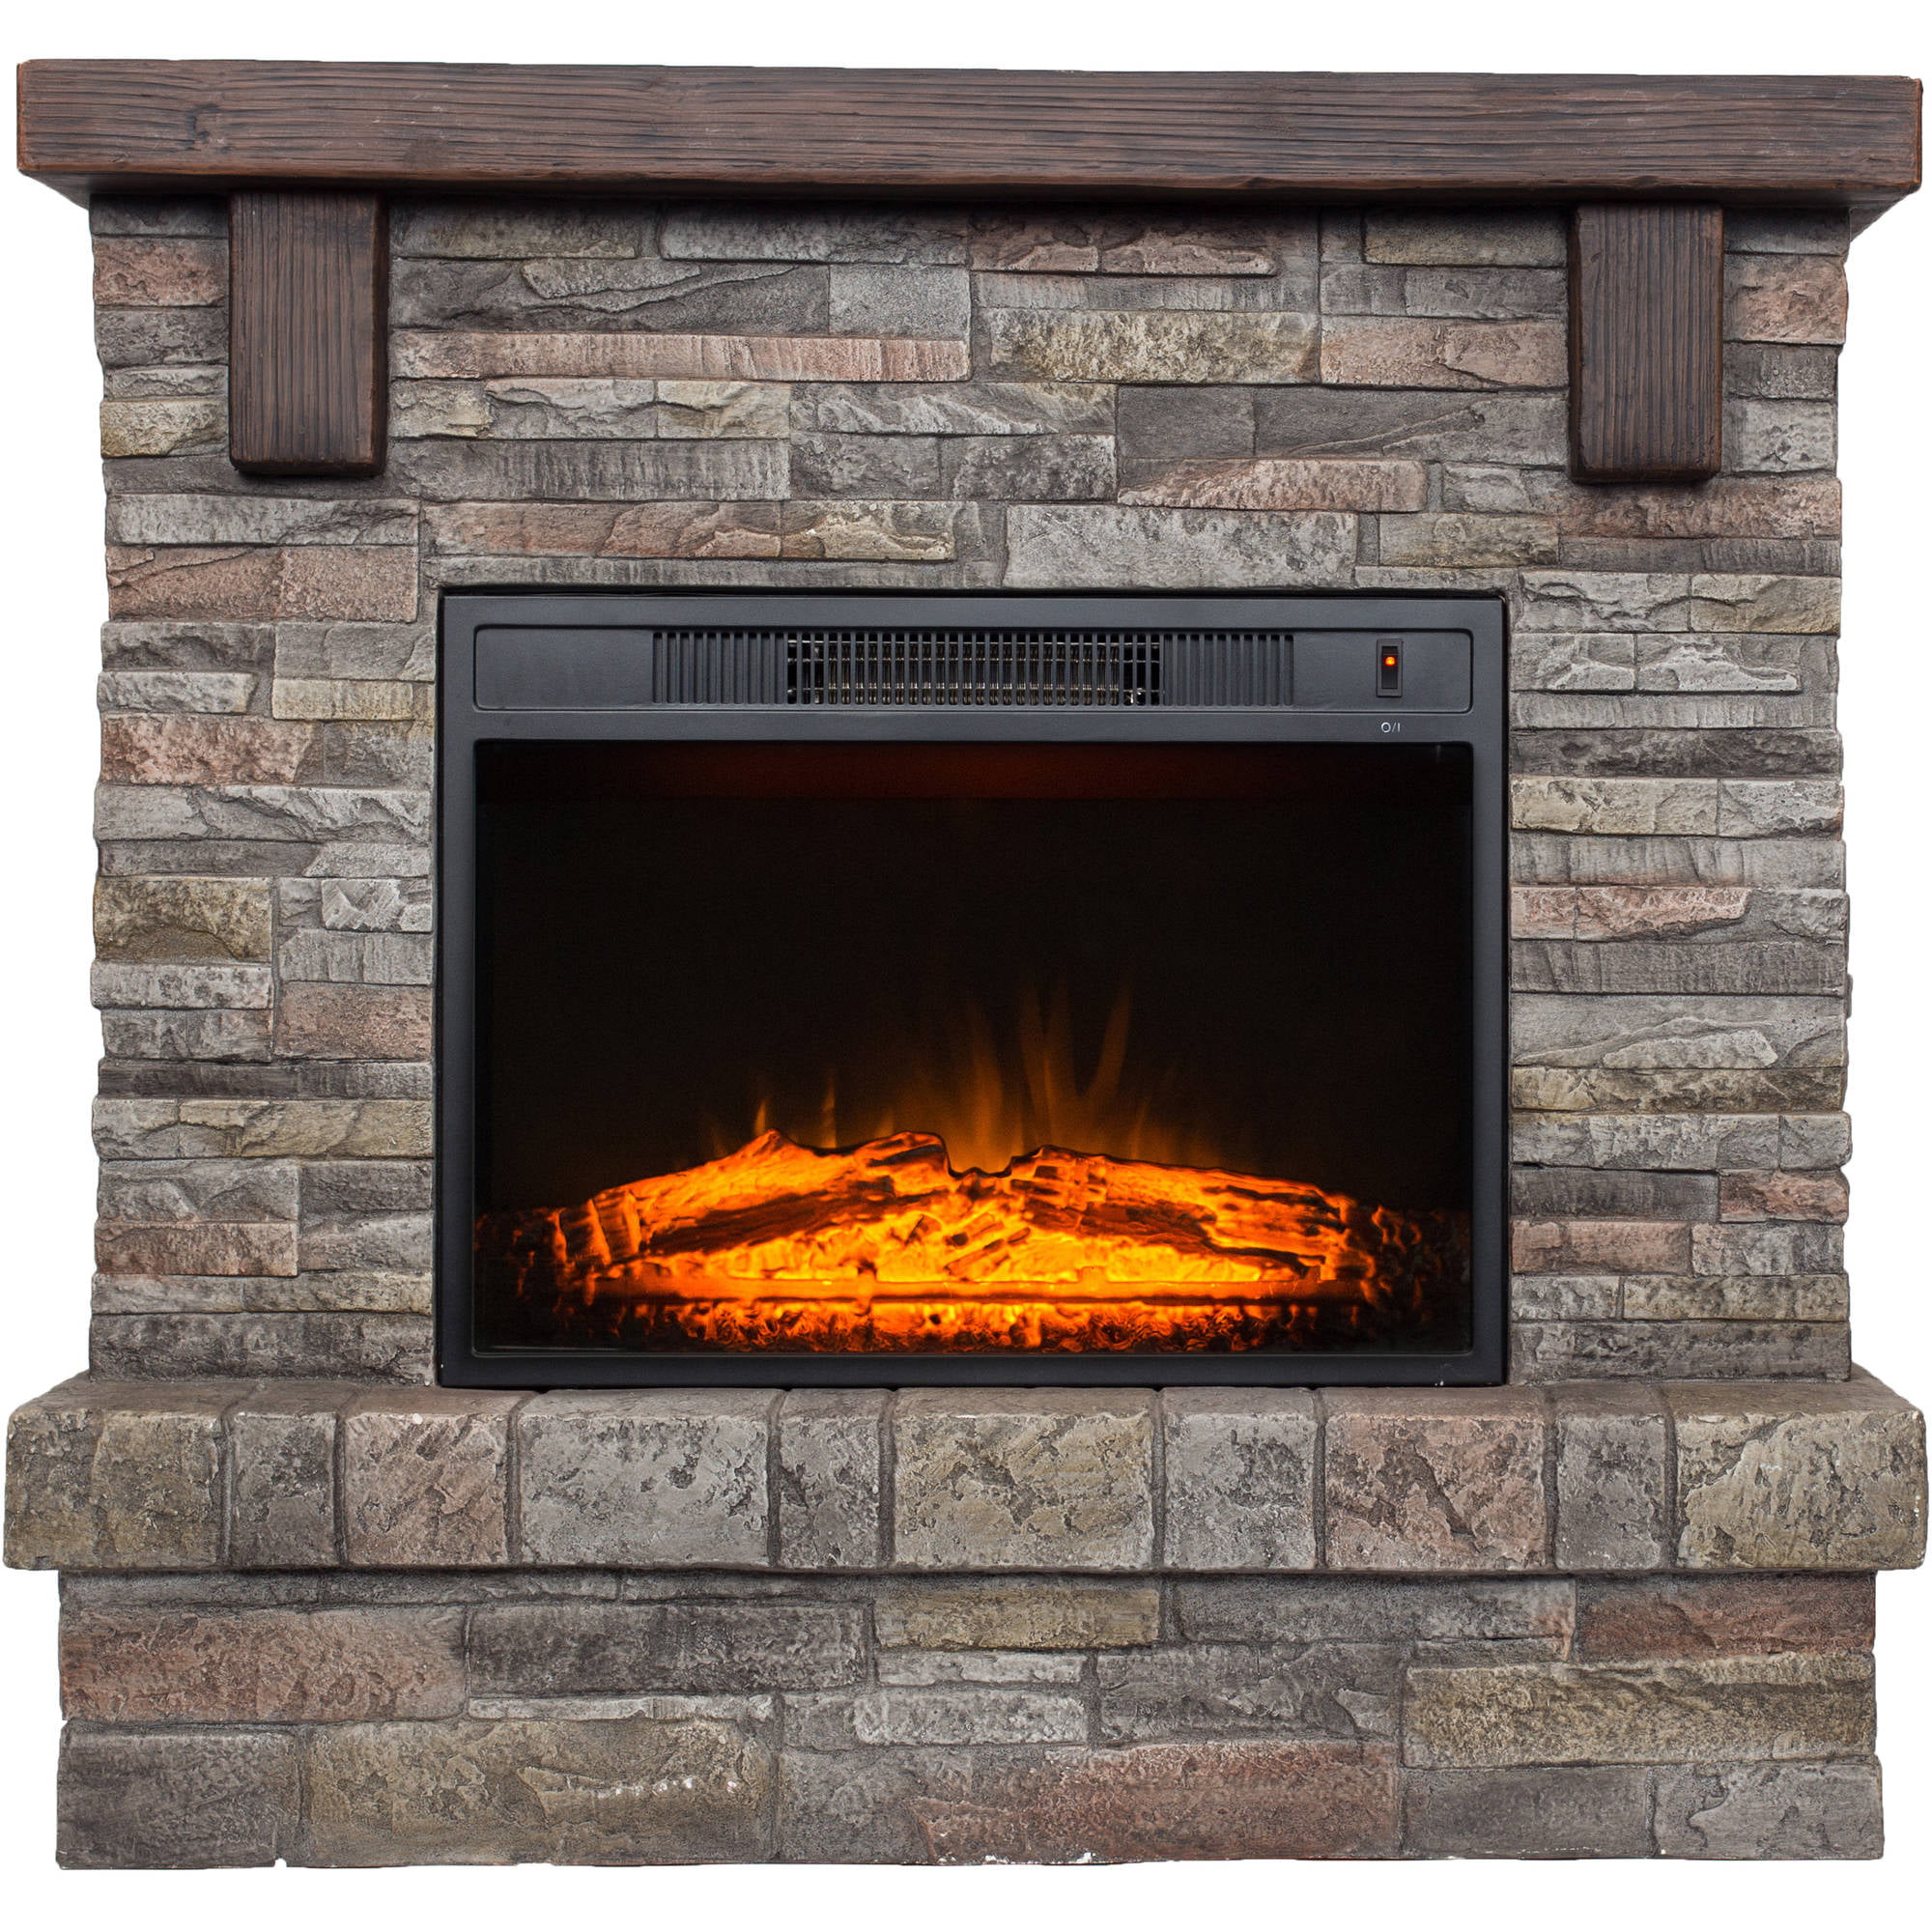 Buy Decor-Flame Electric Fireplace with 41" Mantle at Walmart.com